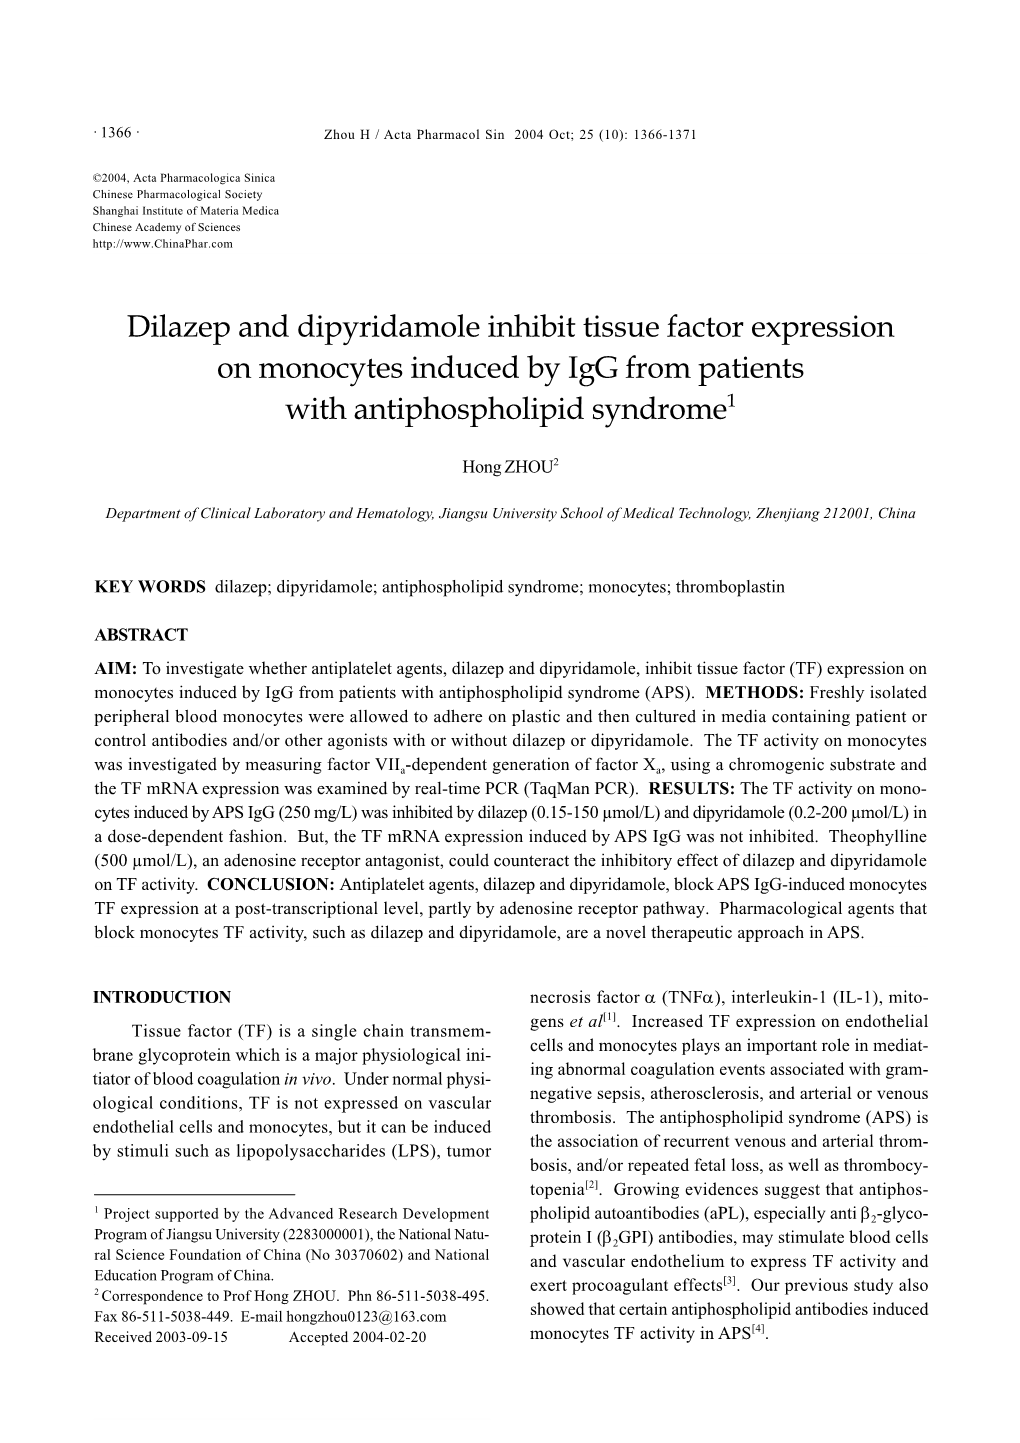 Dilazep and Dipyridamole Inhibit Tissue Factor Expression on Monocytes Induced by Igg from Patients with Antiphospholipid Syndrome1